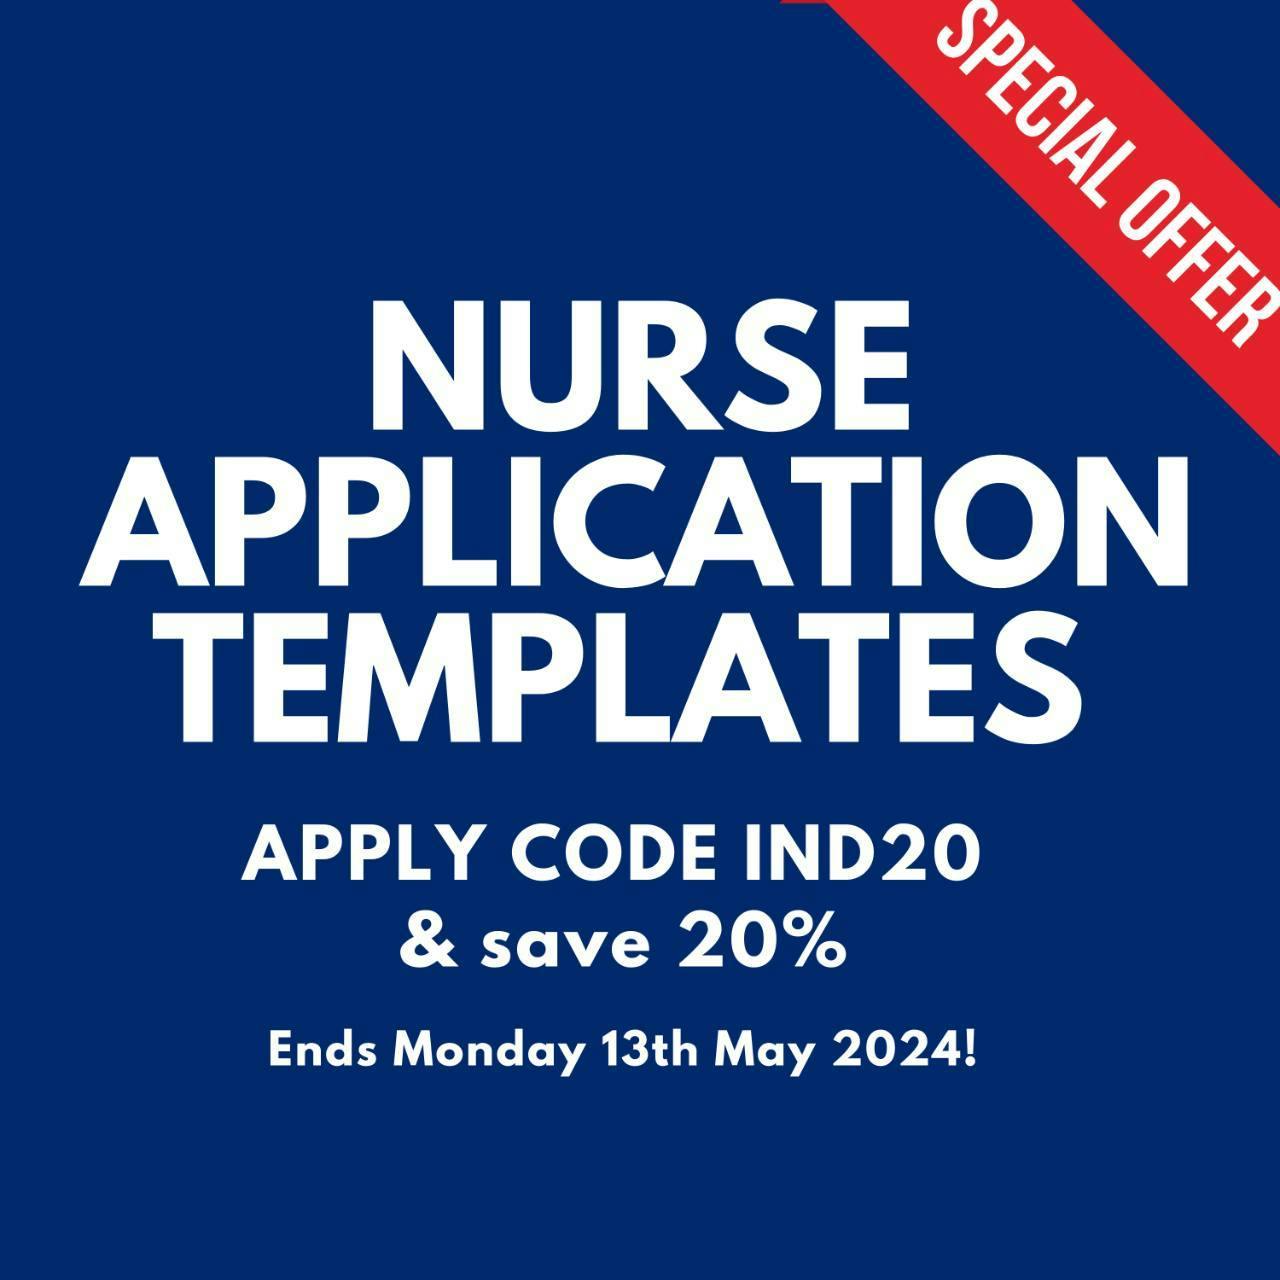 To Celebrate International Nurses Week/Day, I am giving 20% off our new Nurse Application Bundles (CV/CLSC templates for 8 of the most popular nursing career roles!)

Apply code IND20 at checkout. 

Comment BUNDLE to check them out and get yours for less today! 

#nurse #career #aussienurse #resume #cv #coverletter #resumetips #nursing #gradnurselife #en #rn #nursemanager